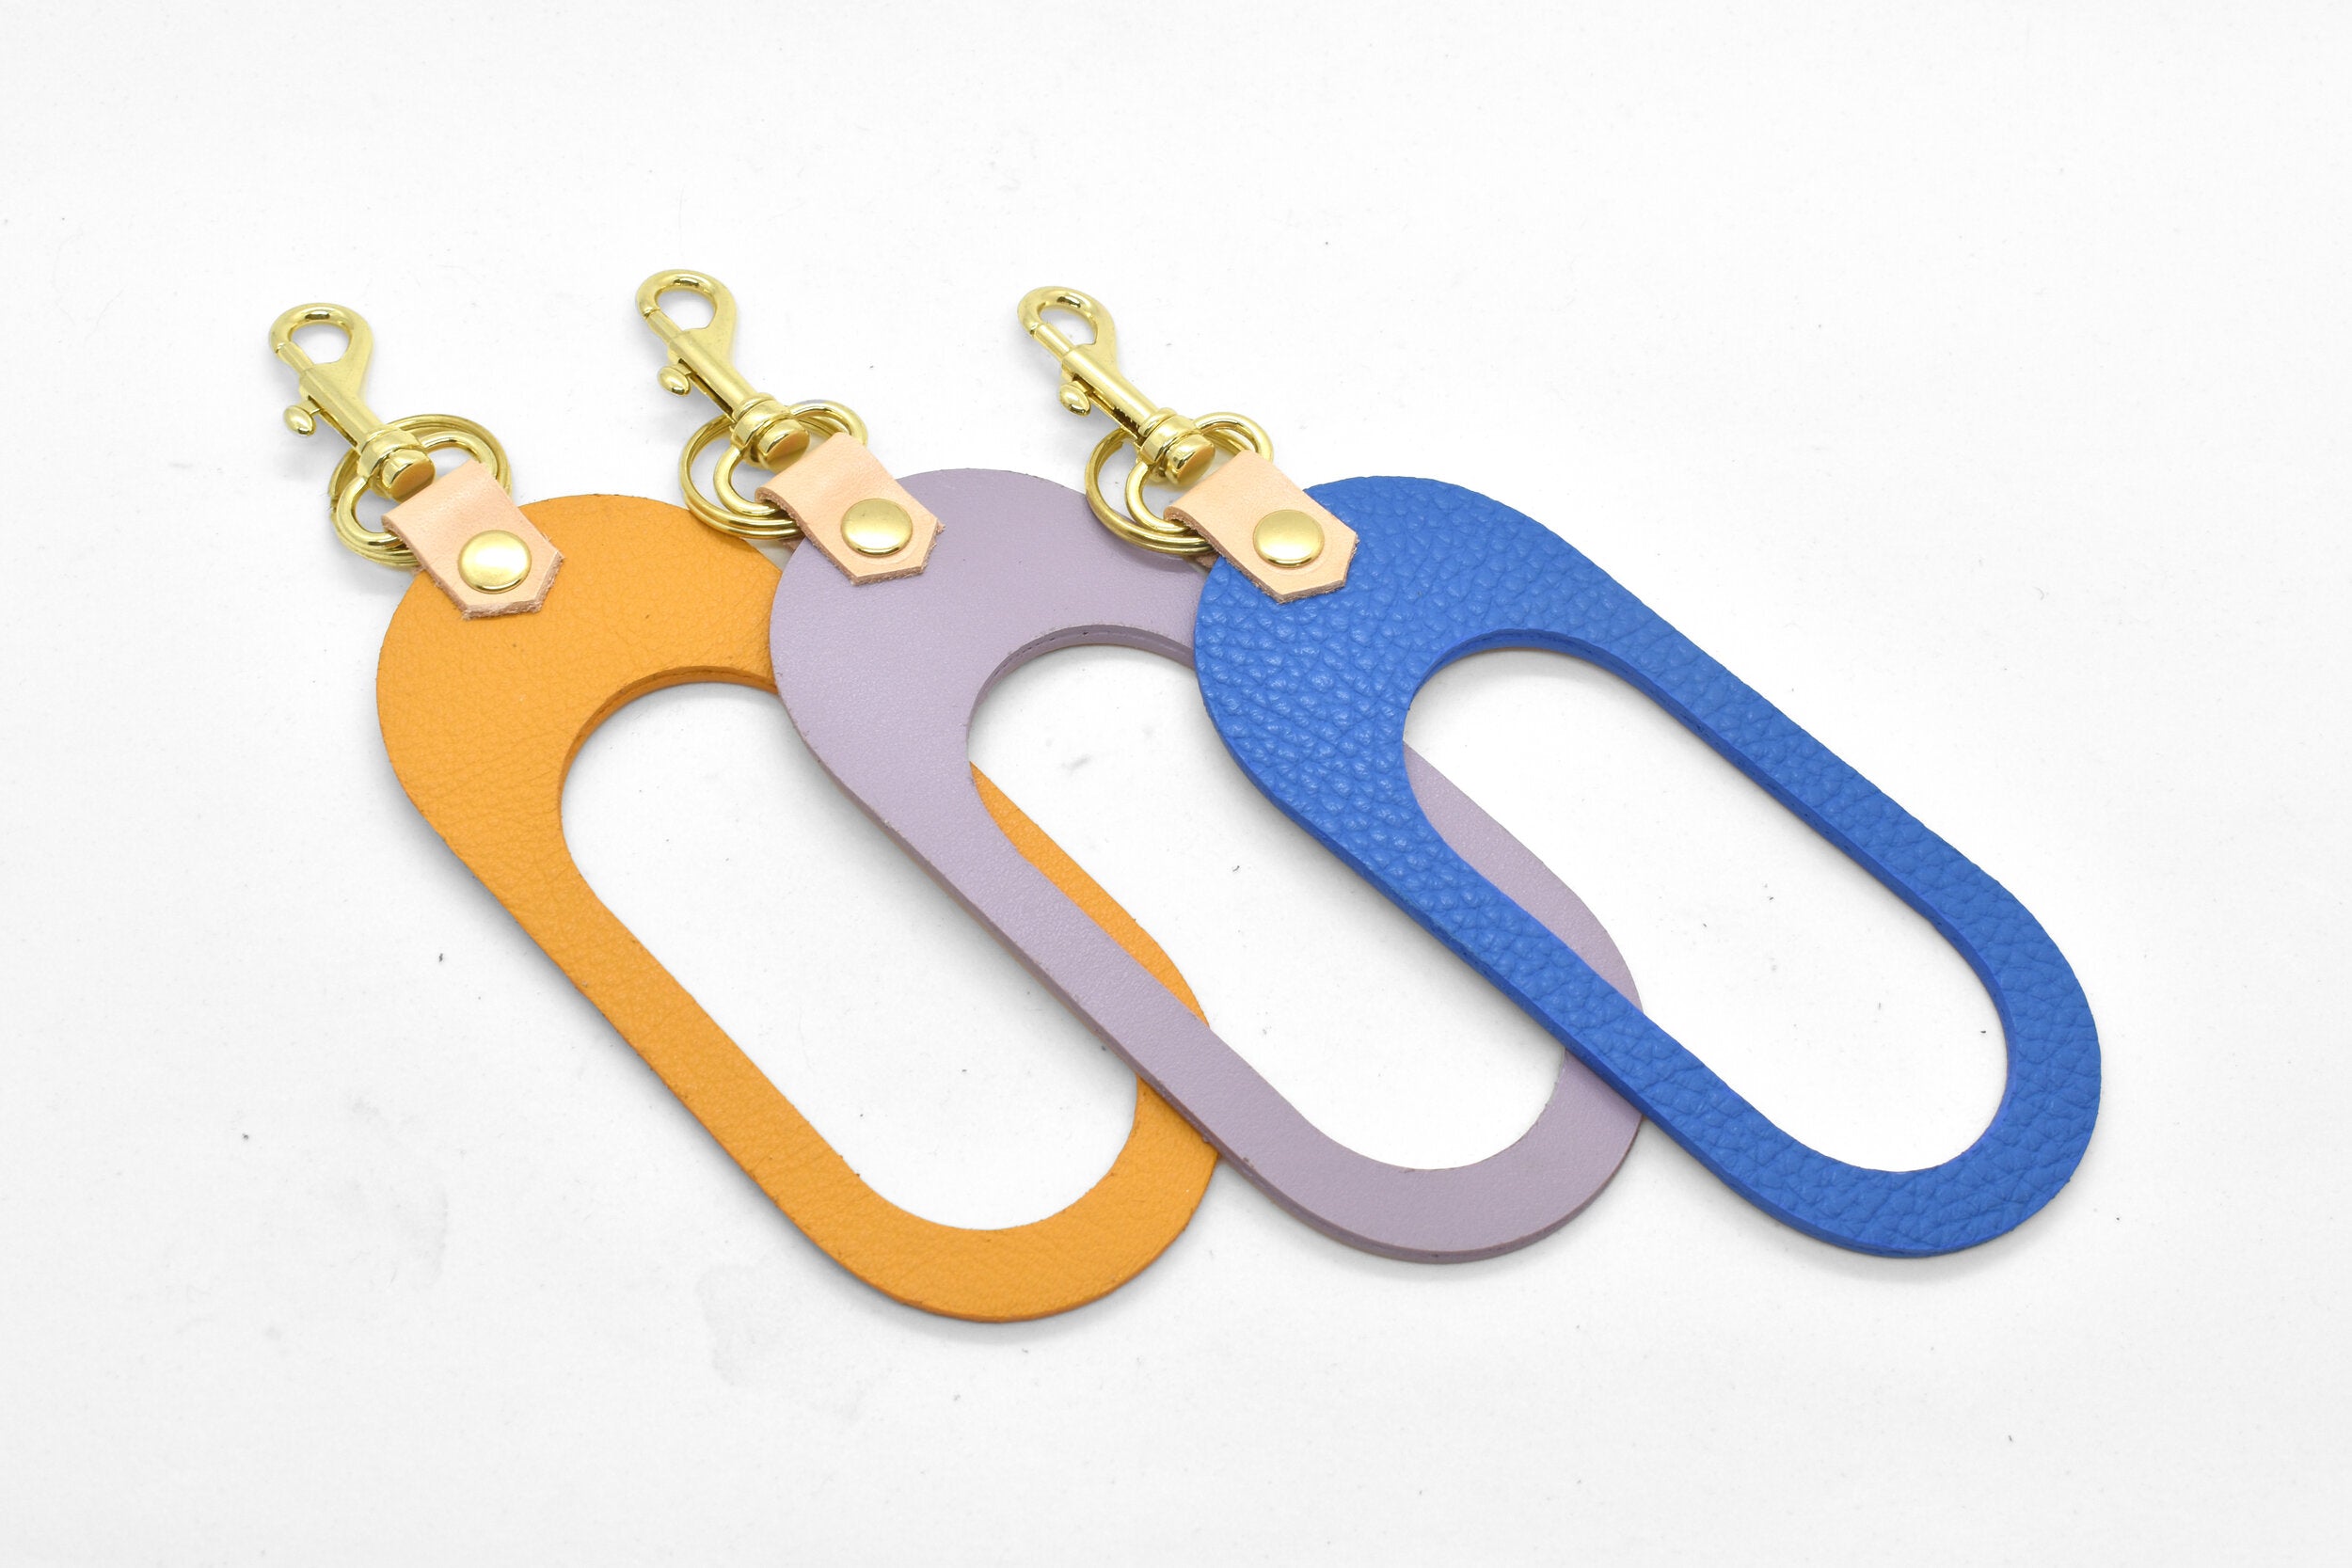 marigold lavender matisse blue leather cut out keychains with gold hardware keyring and veg tan leather side dual color accessory gift for sister